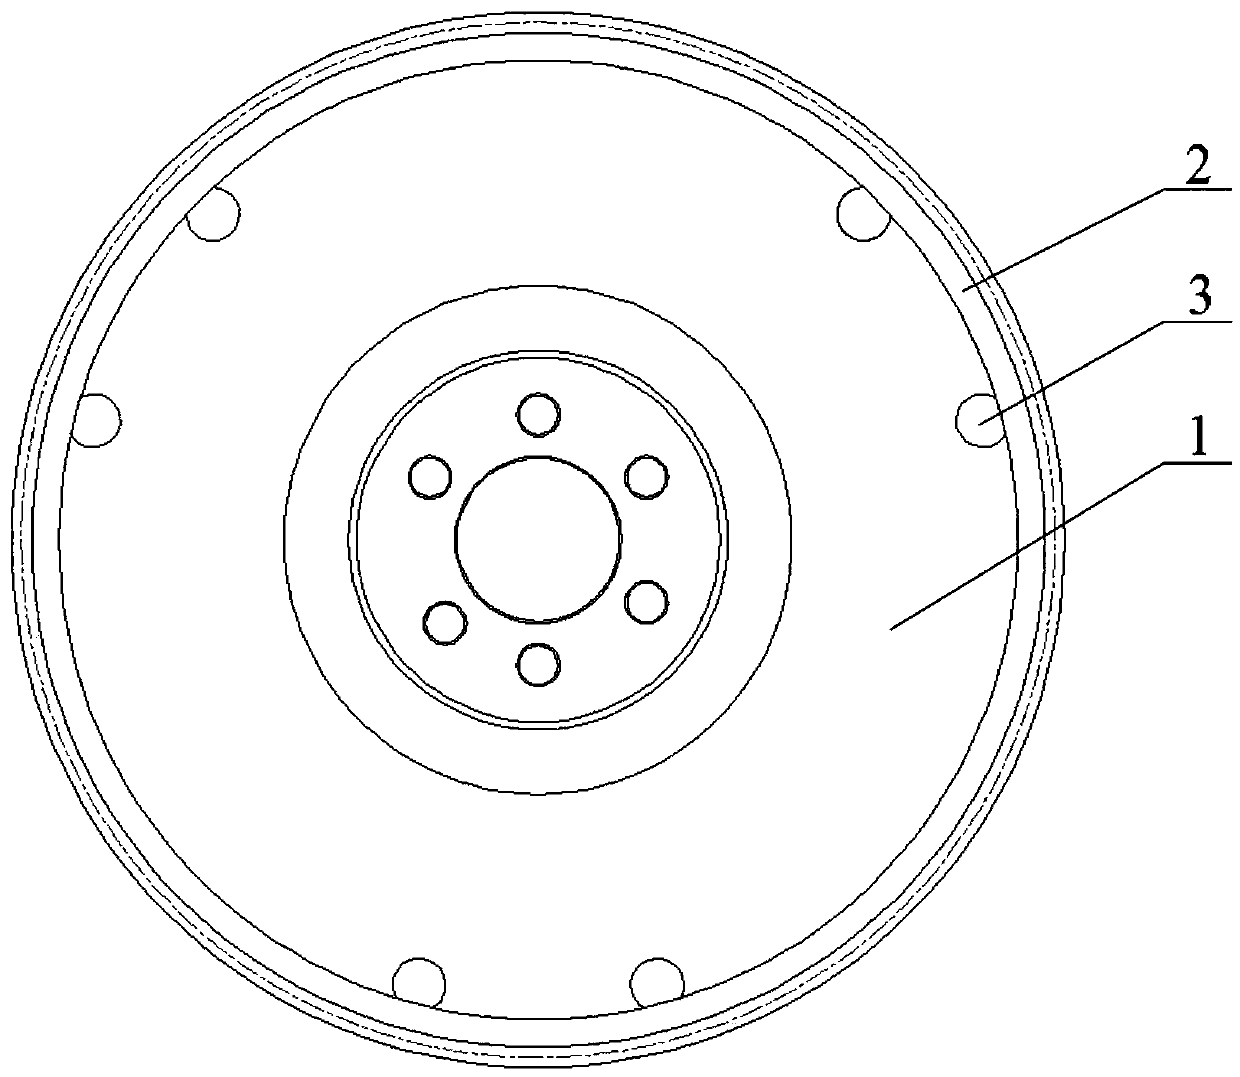 Engine and flywheel assembly thereof